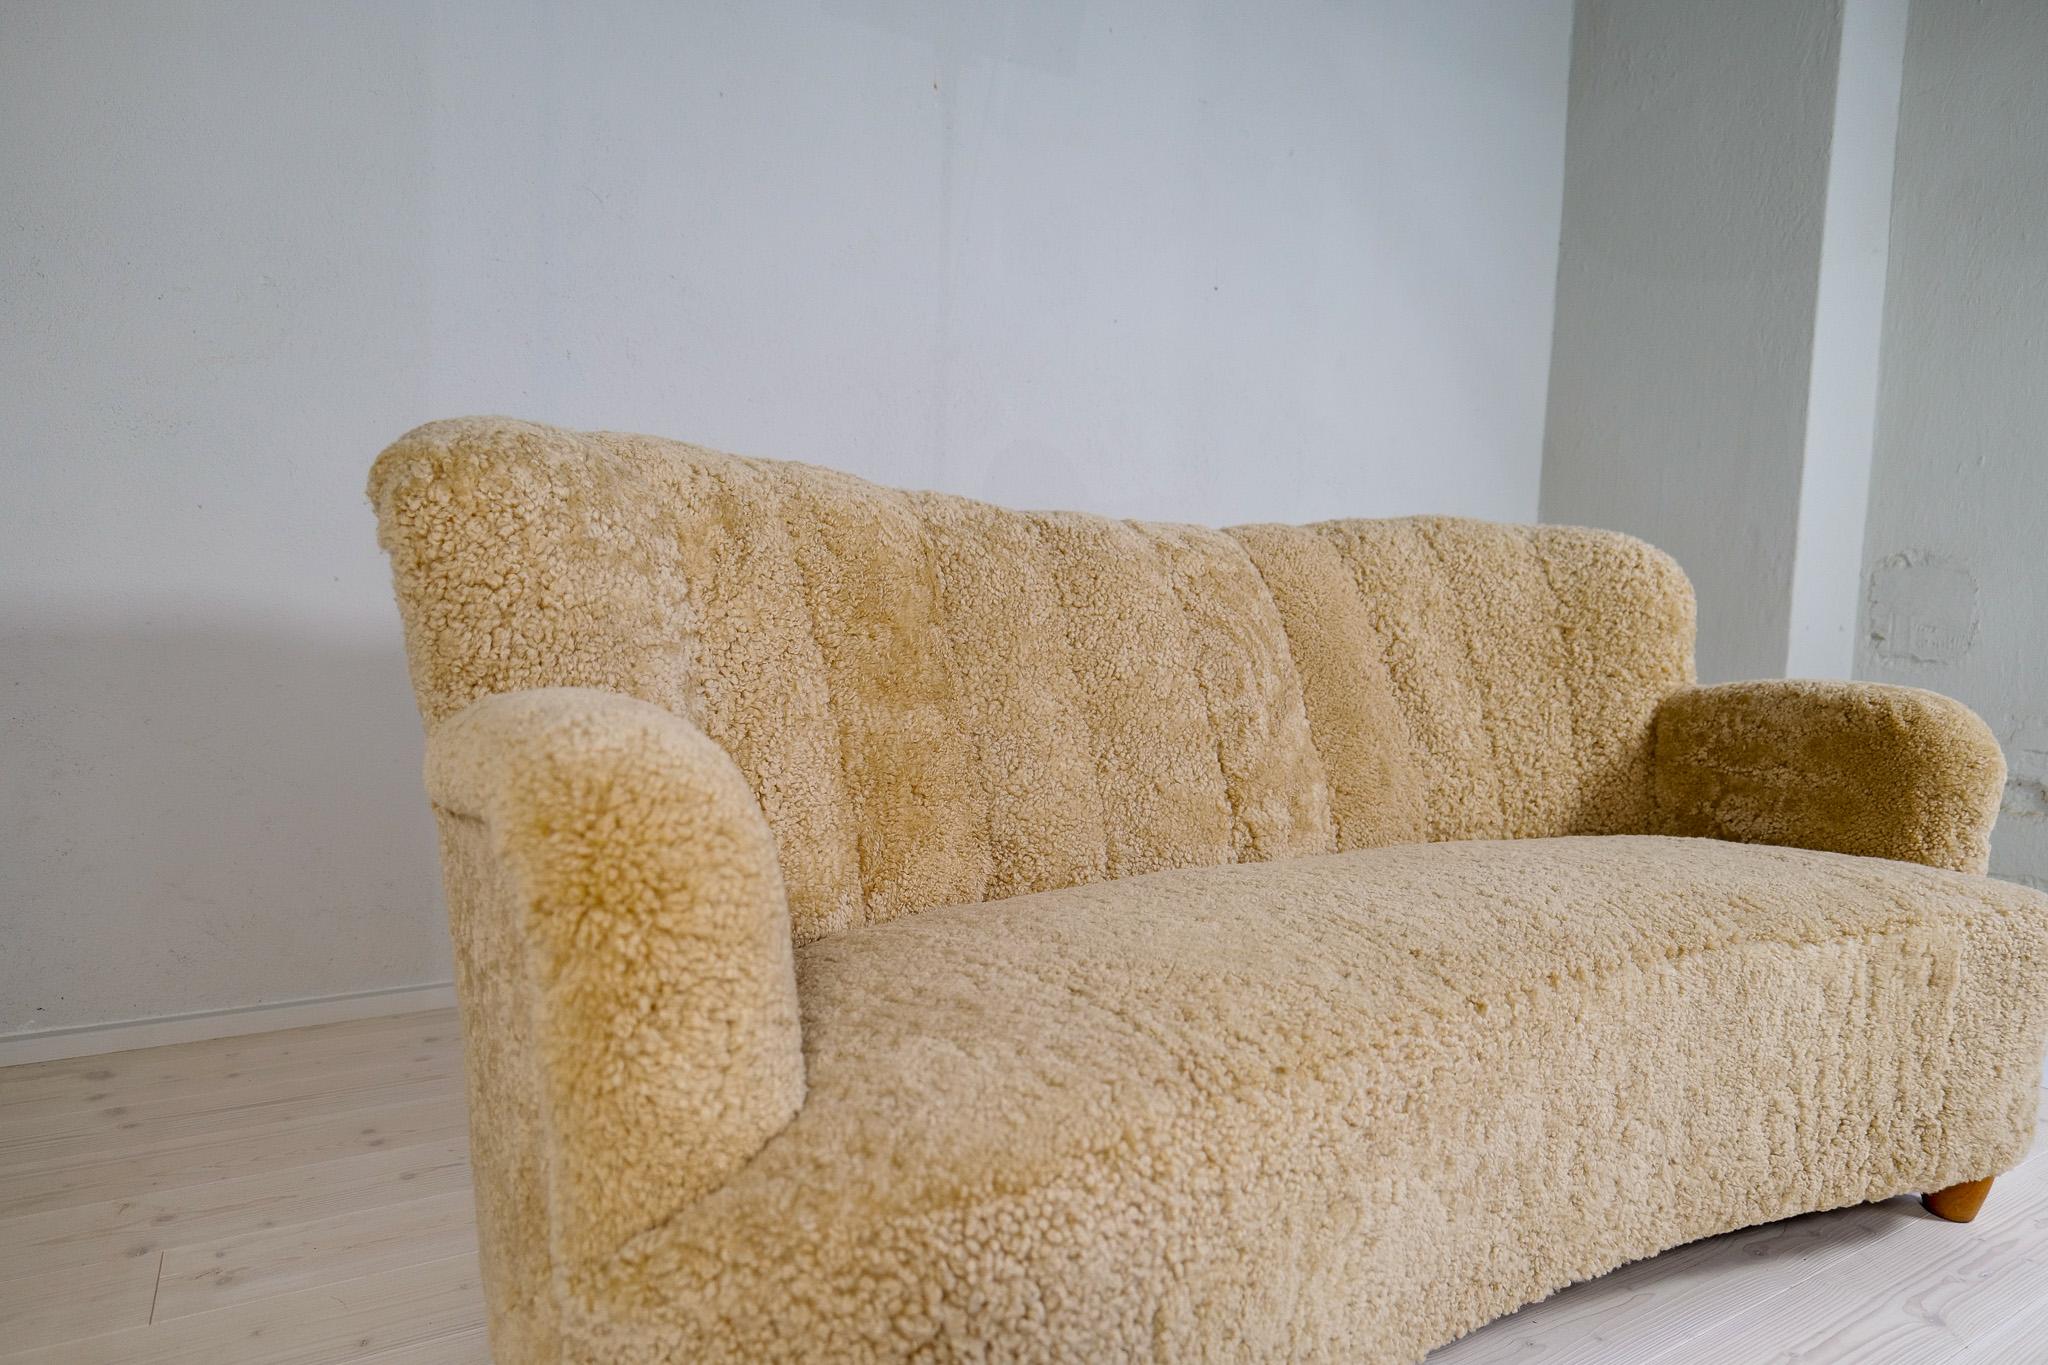 Midcentury Sculptrual Sheepskin/Shearling Sofa in Manors of Marta Blomstedt 1